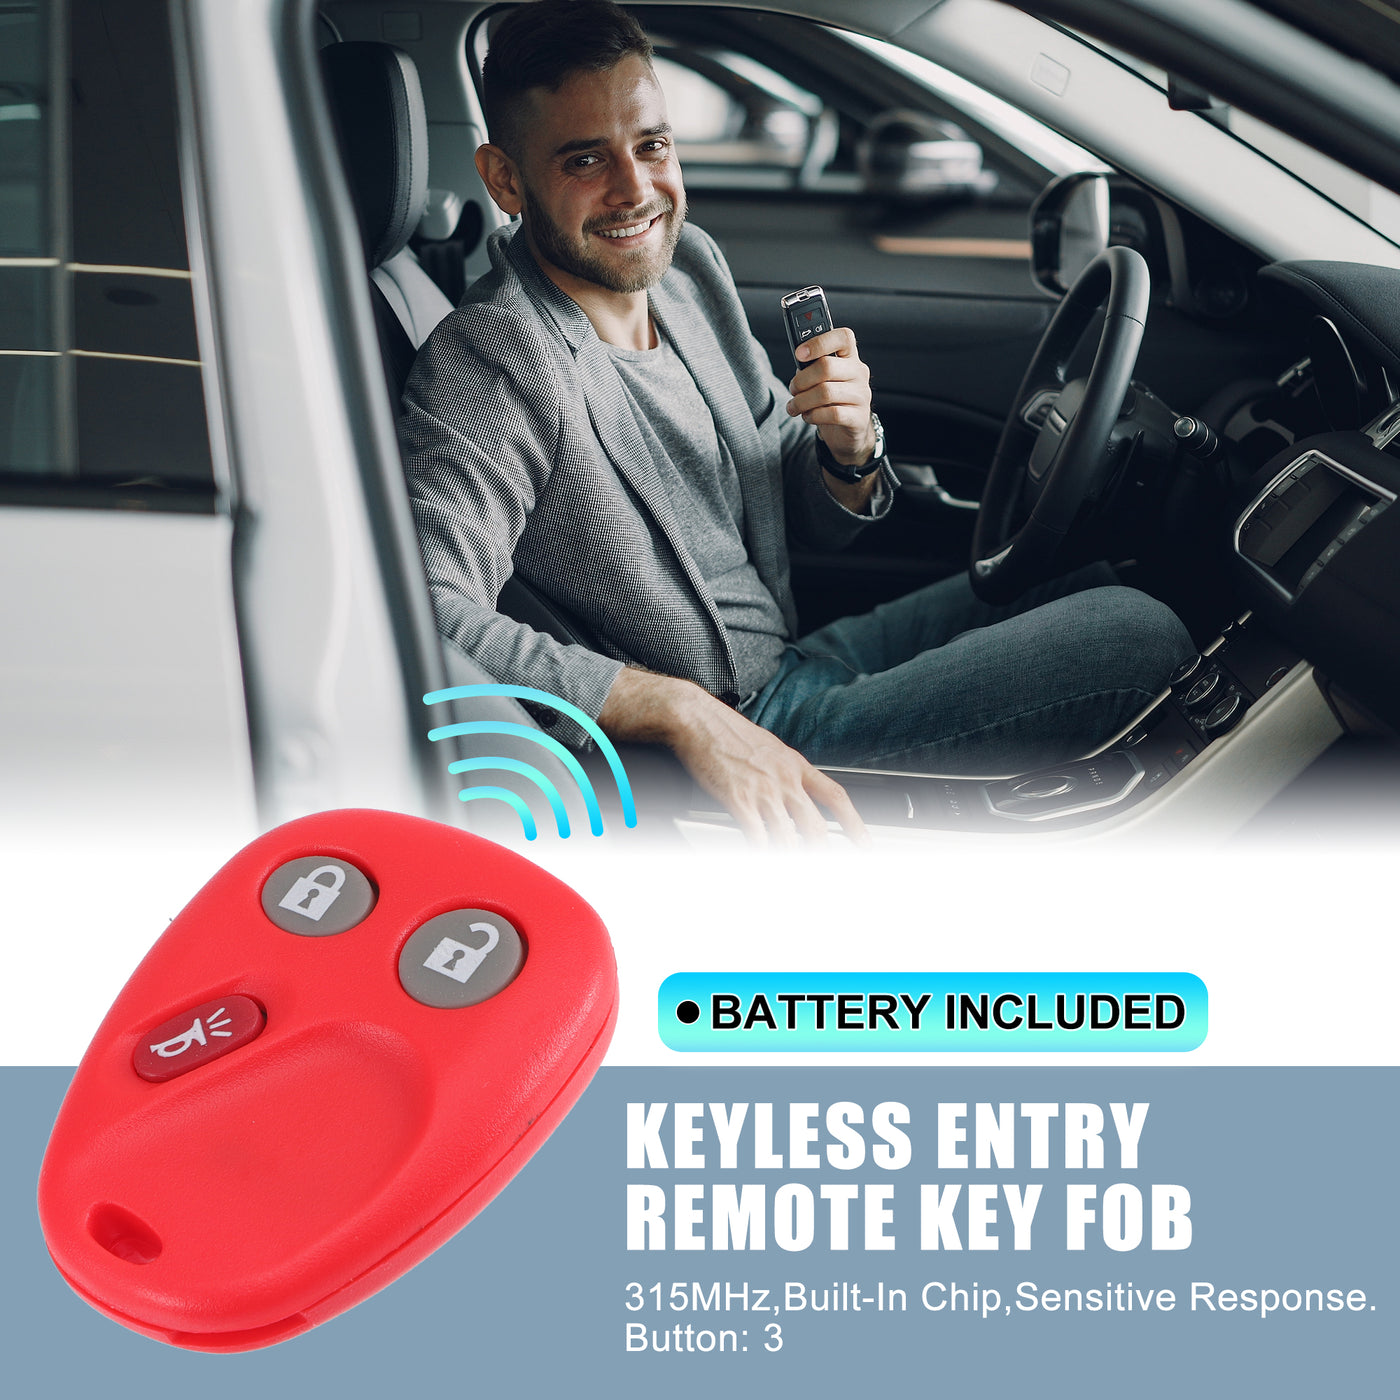 X AUTOHAUX 315MHz LHJ011Replacement Keyless Entry Remote Key Fob for Chevrolet Silverado for GMC Sierra 1500 2500 3500 for Chevy Tahoe for Cadillac Escalade 2003-2006 3 Buttons Key